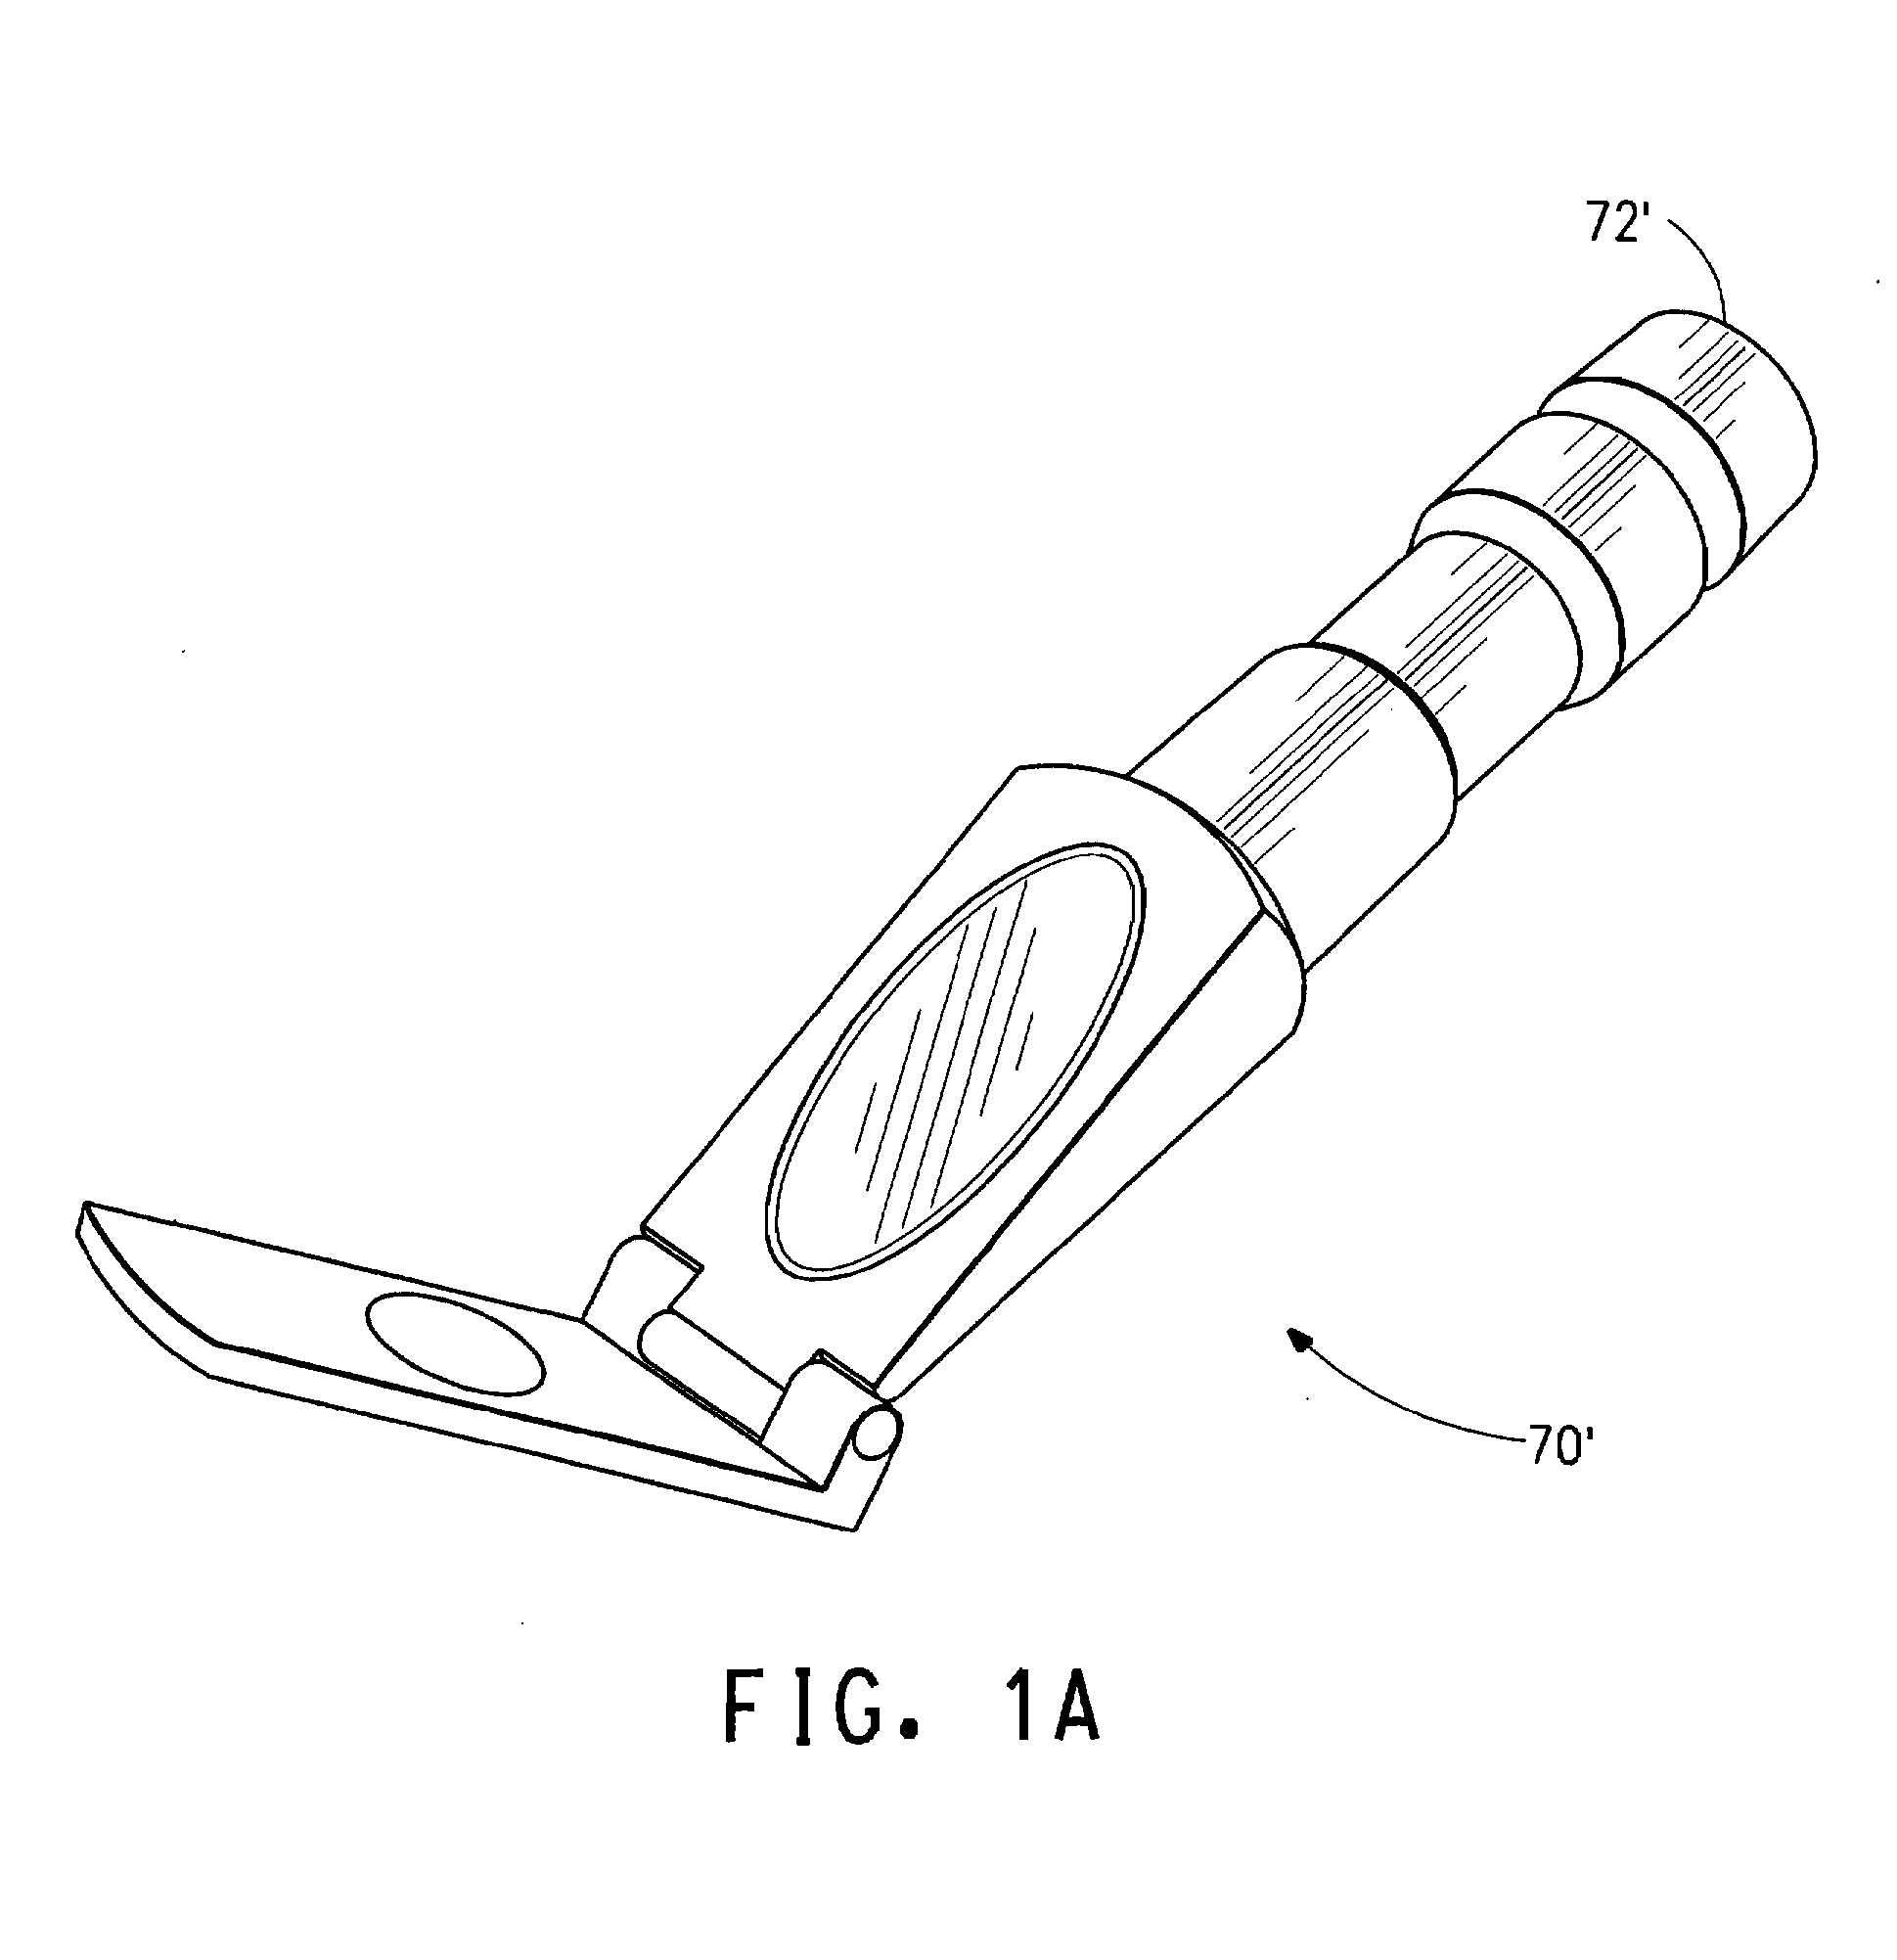 Method of detecting leaks of fluoroolefin compositions and sensors used therefor